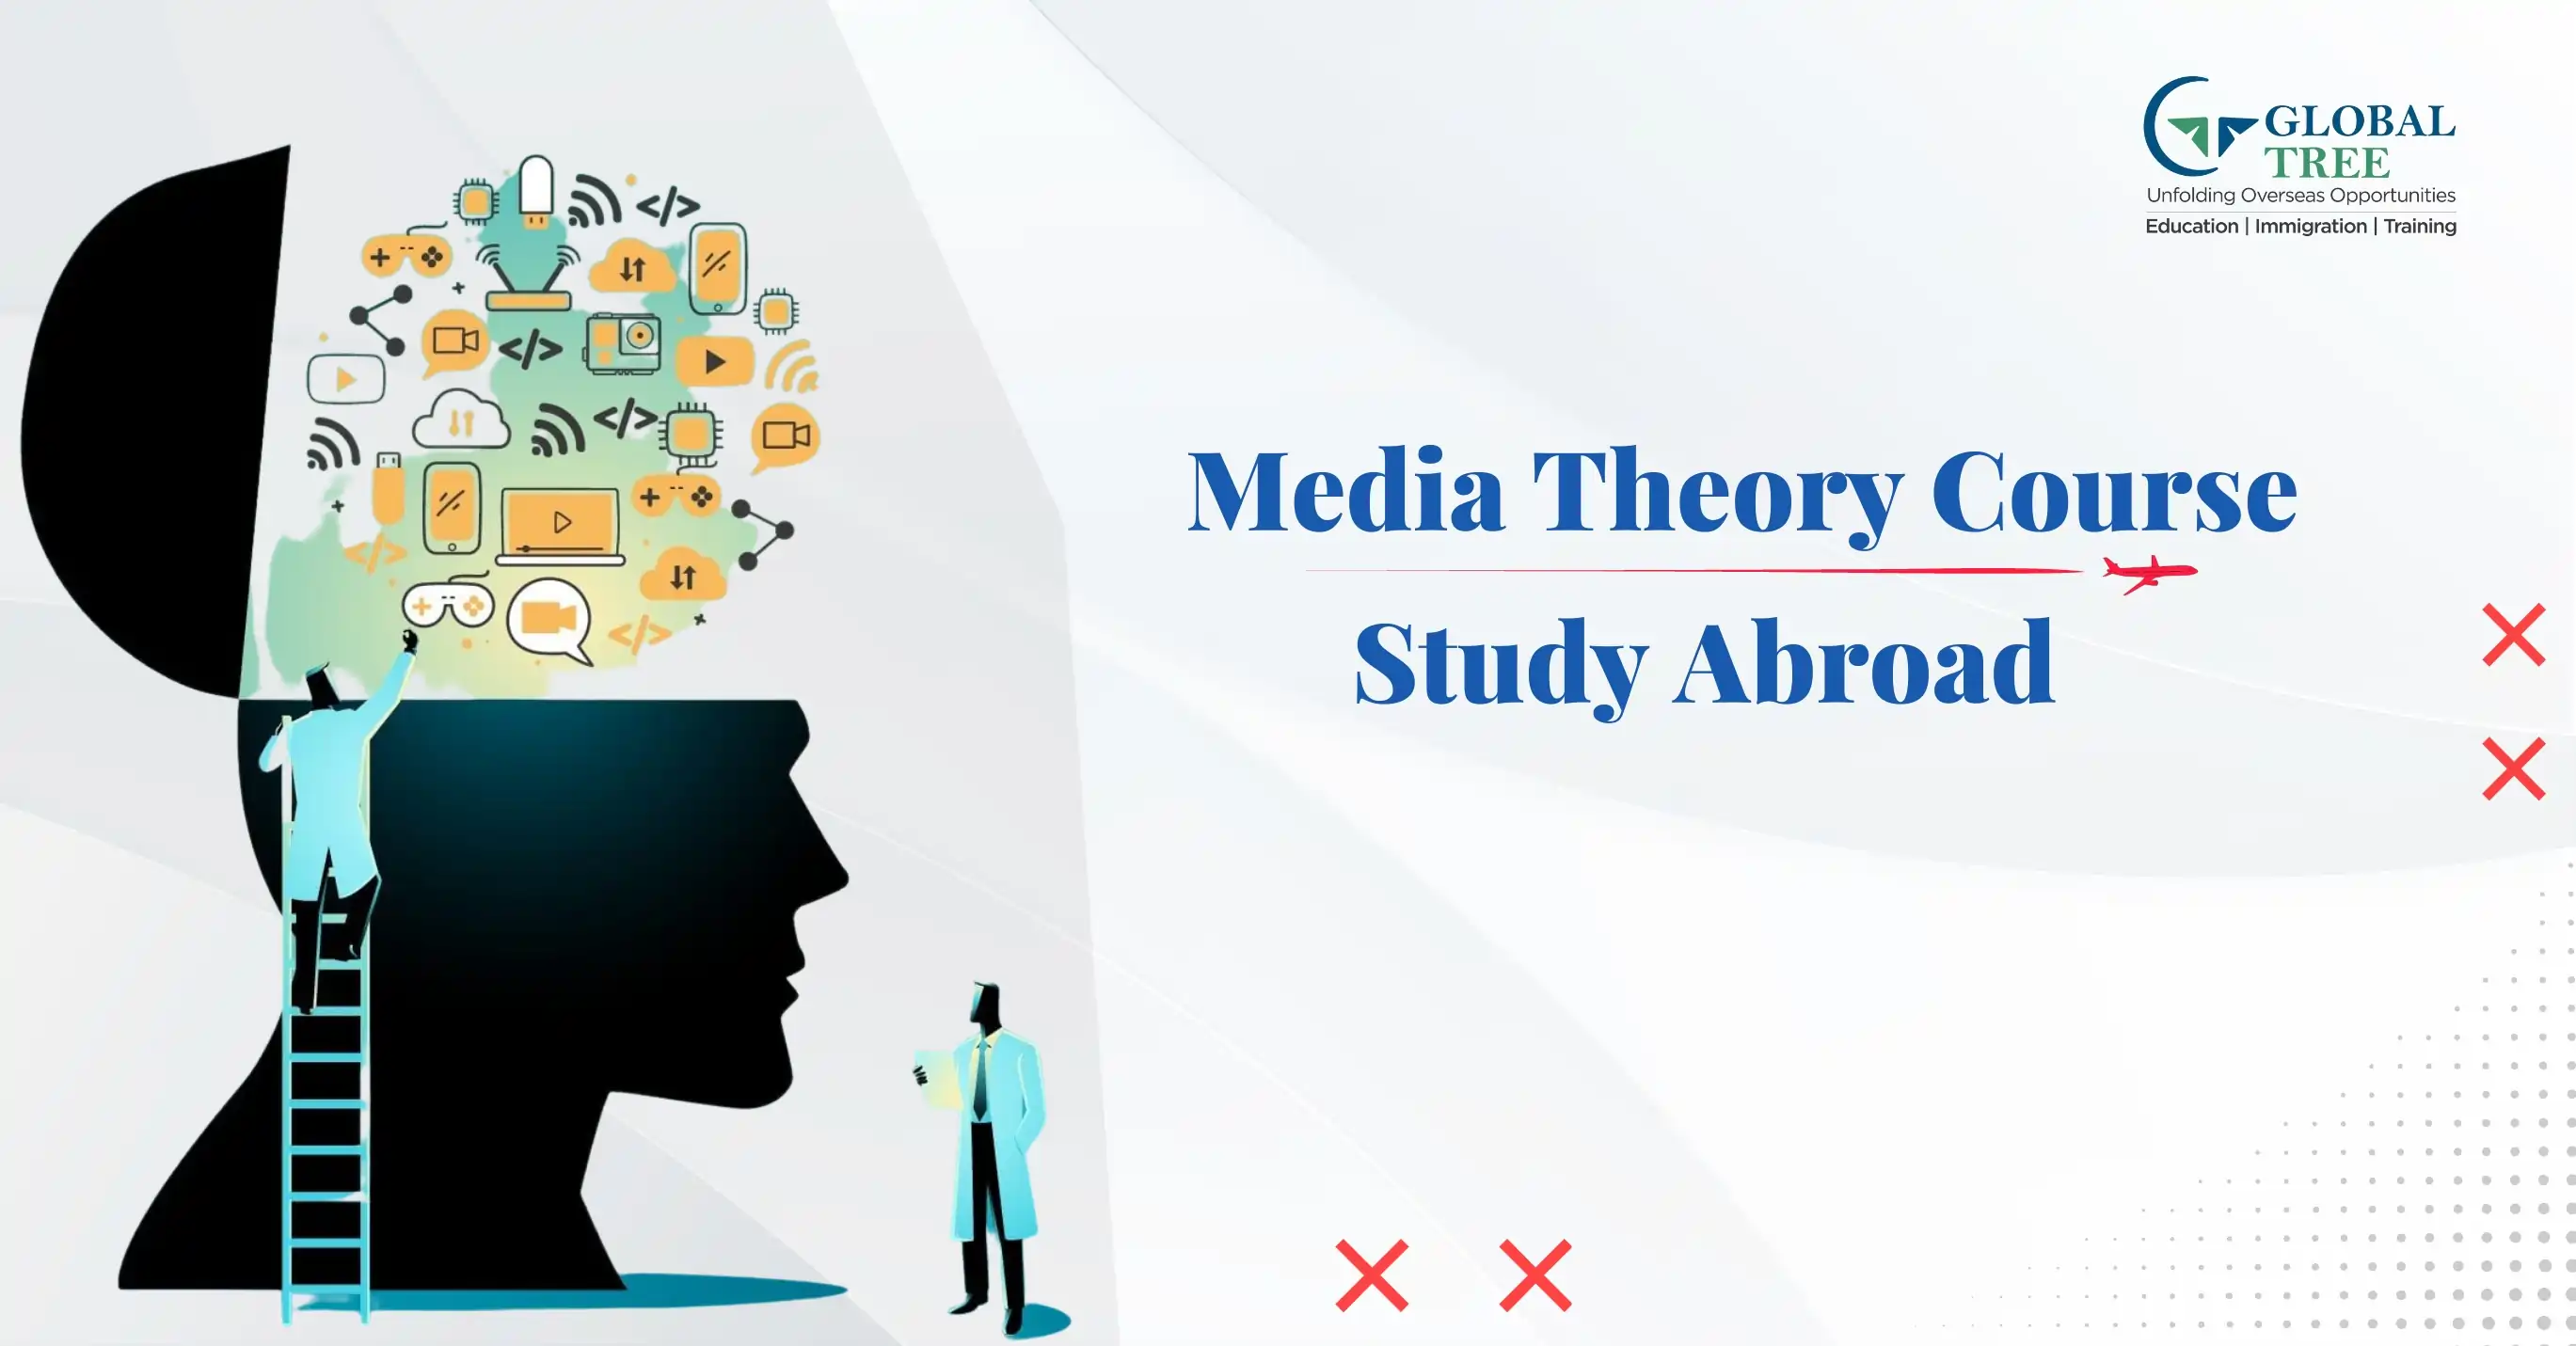 Media Theory Course to Study Abroad